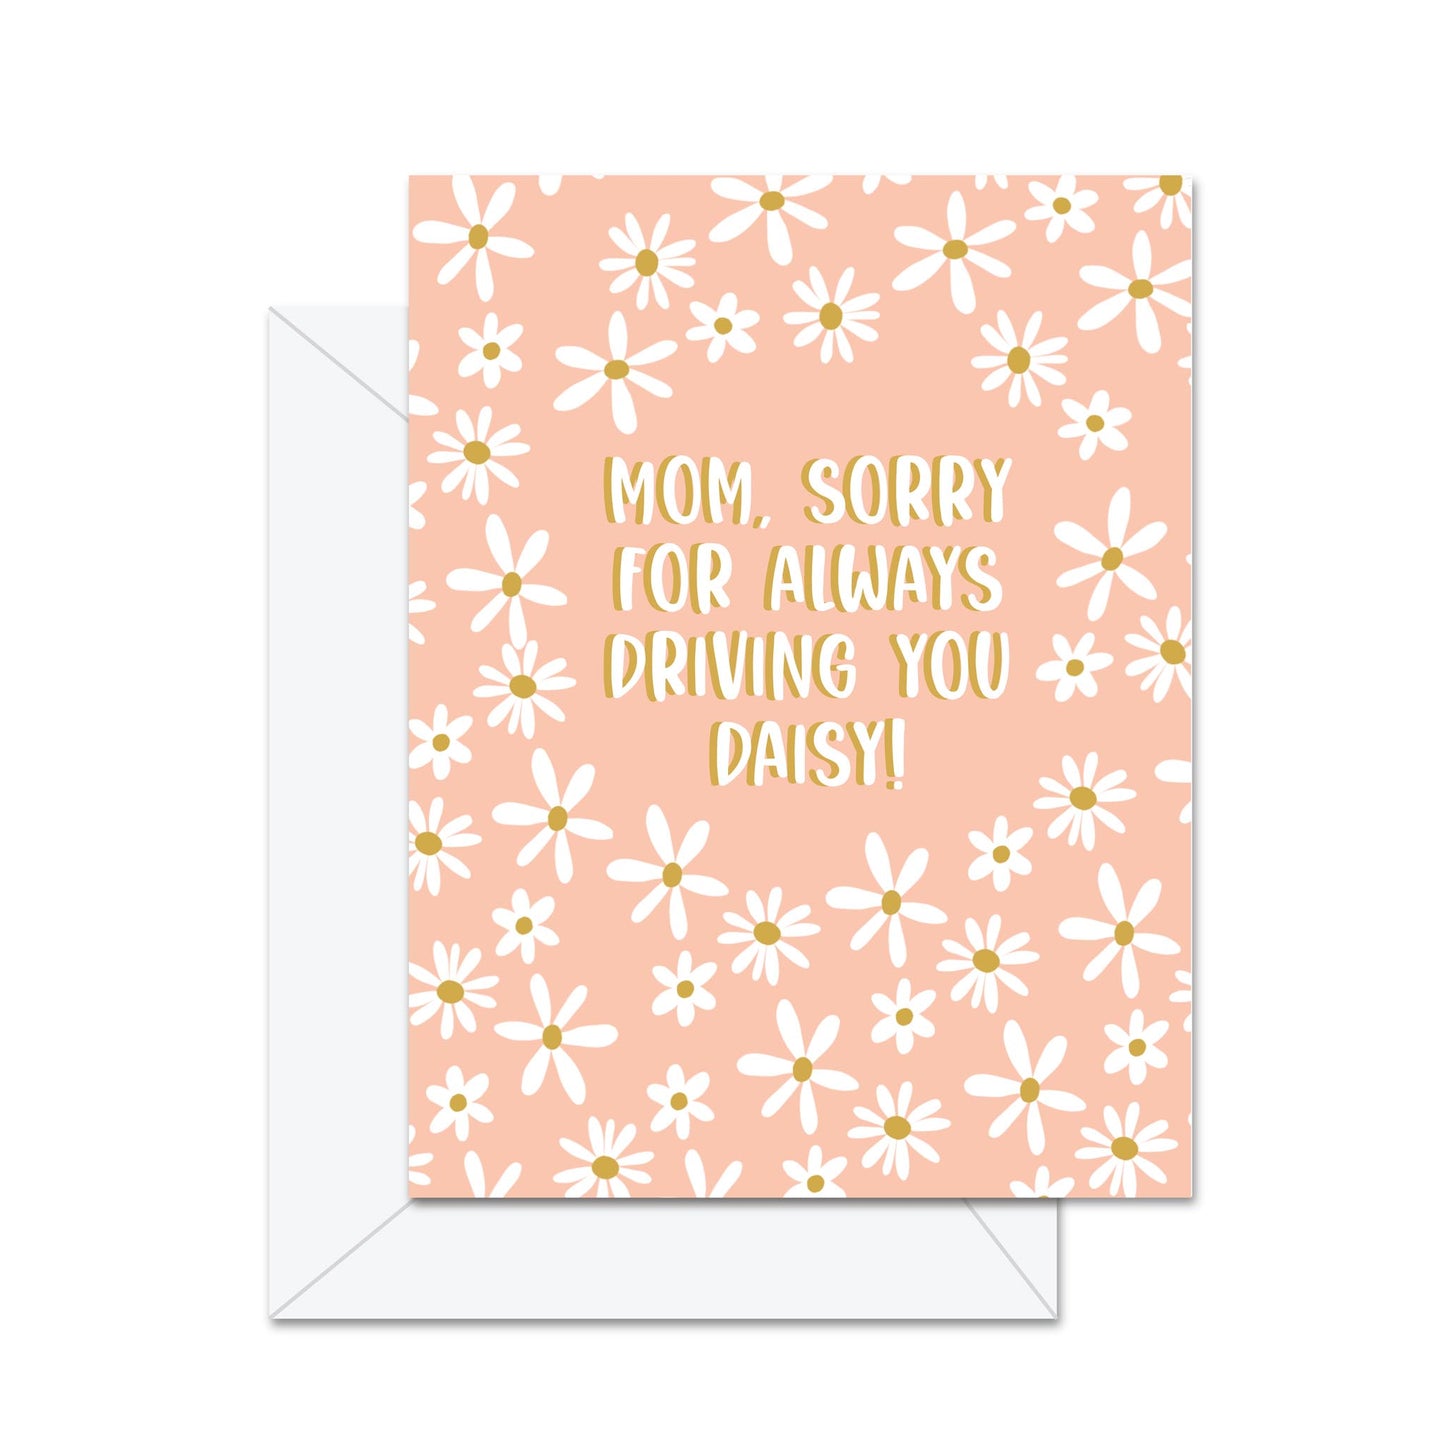 Mom, Sorry For Always Driving You Daisy! - Greeting Card